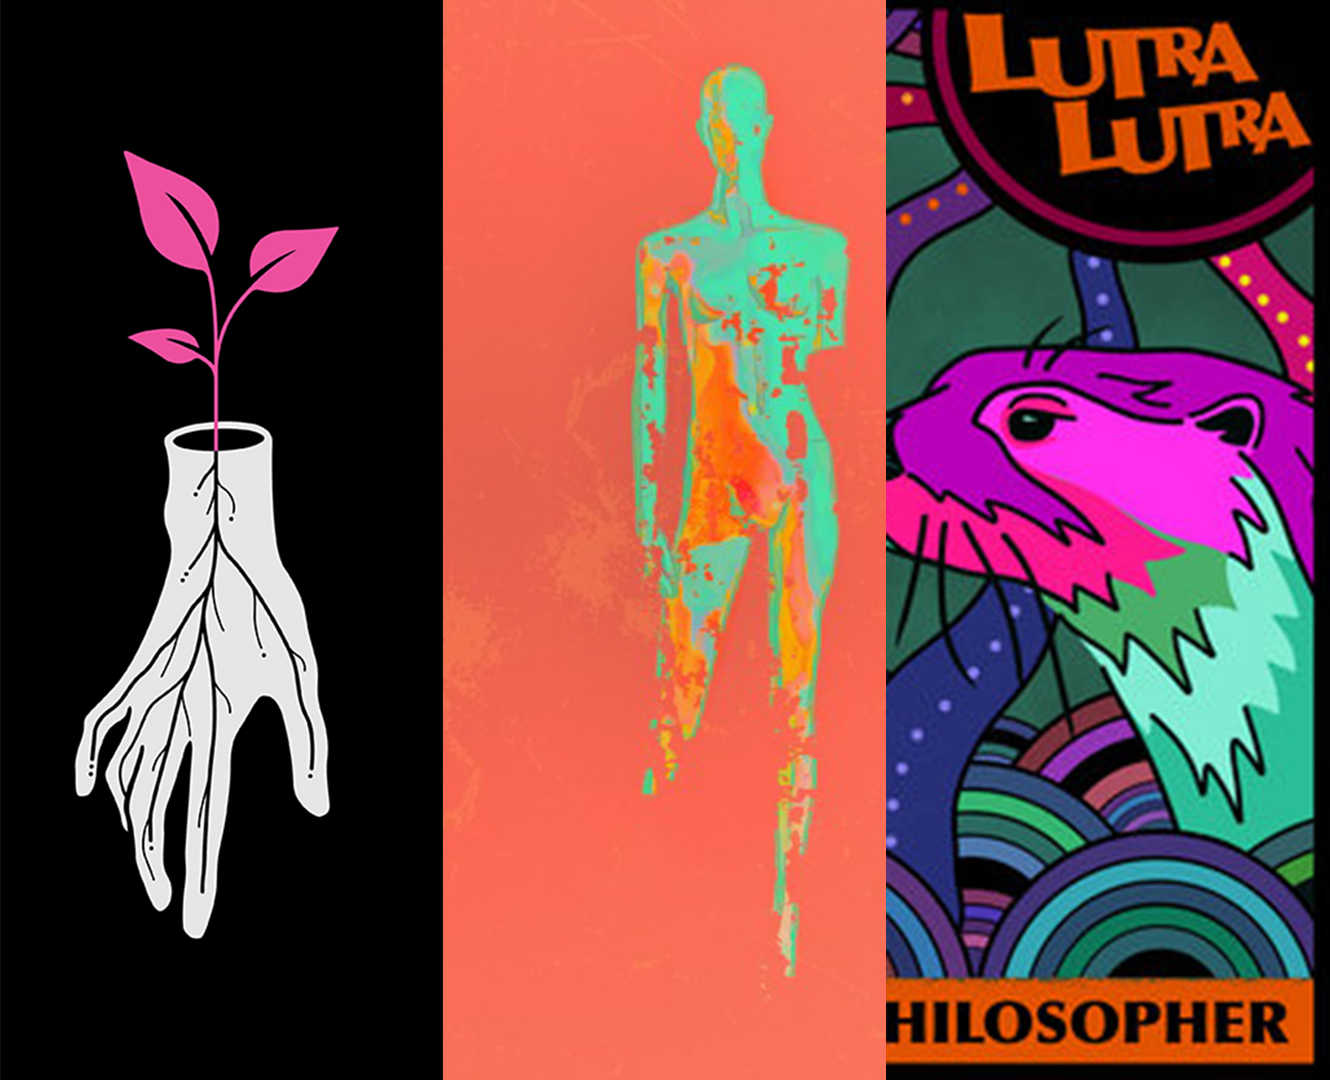 Blank Statues, Whale and The Wolf and Lutra Lutra album covers